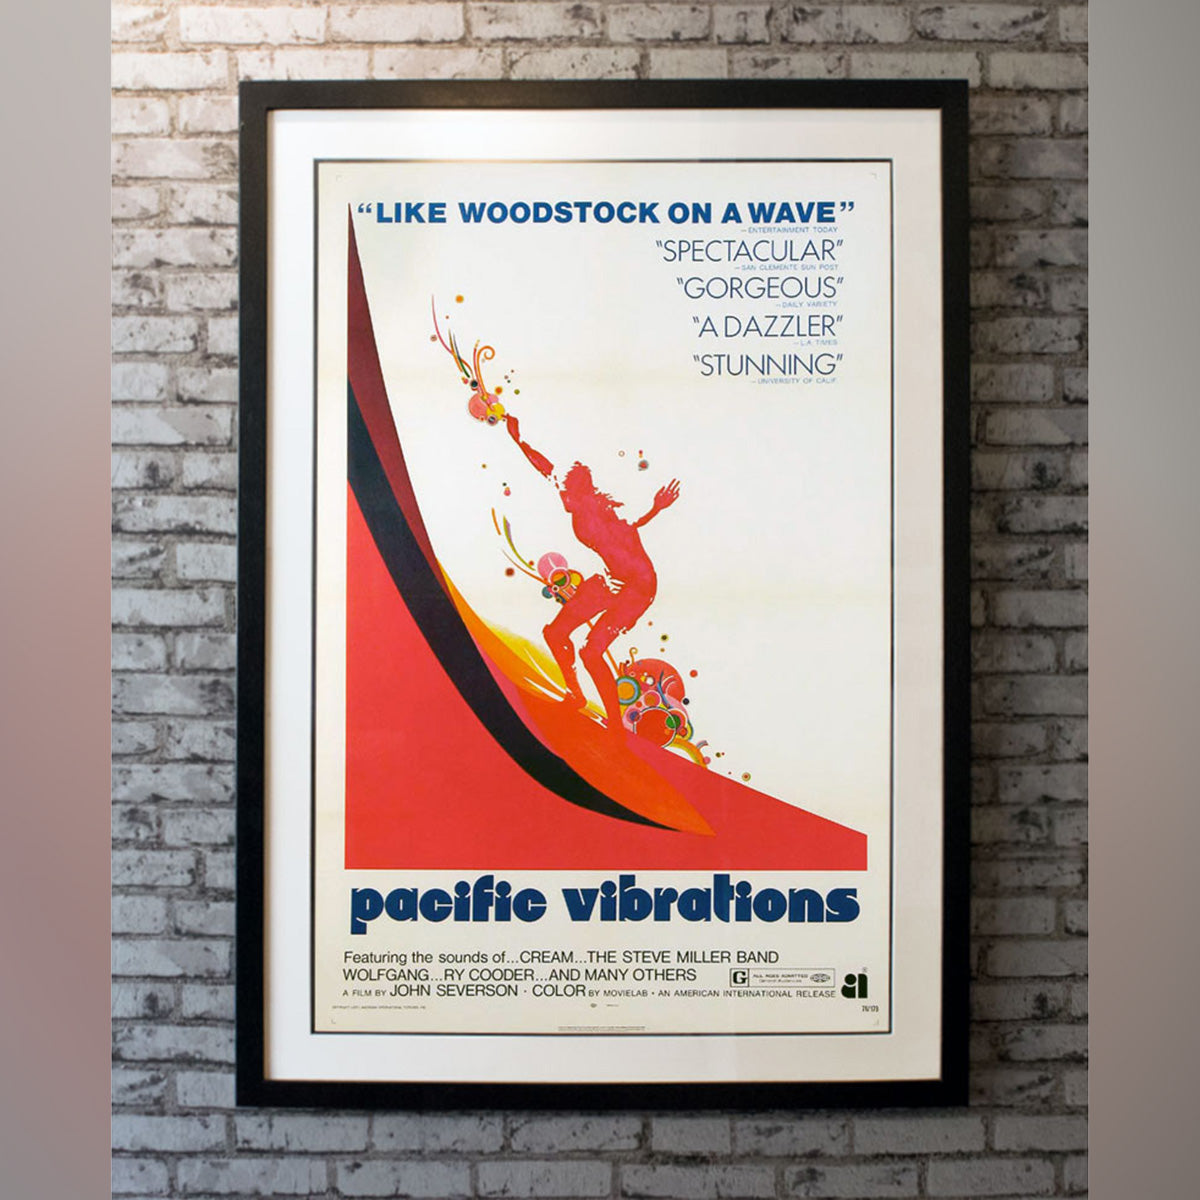 Original Movie Poster of Pacific Vibrations (1970)